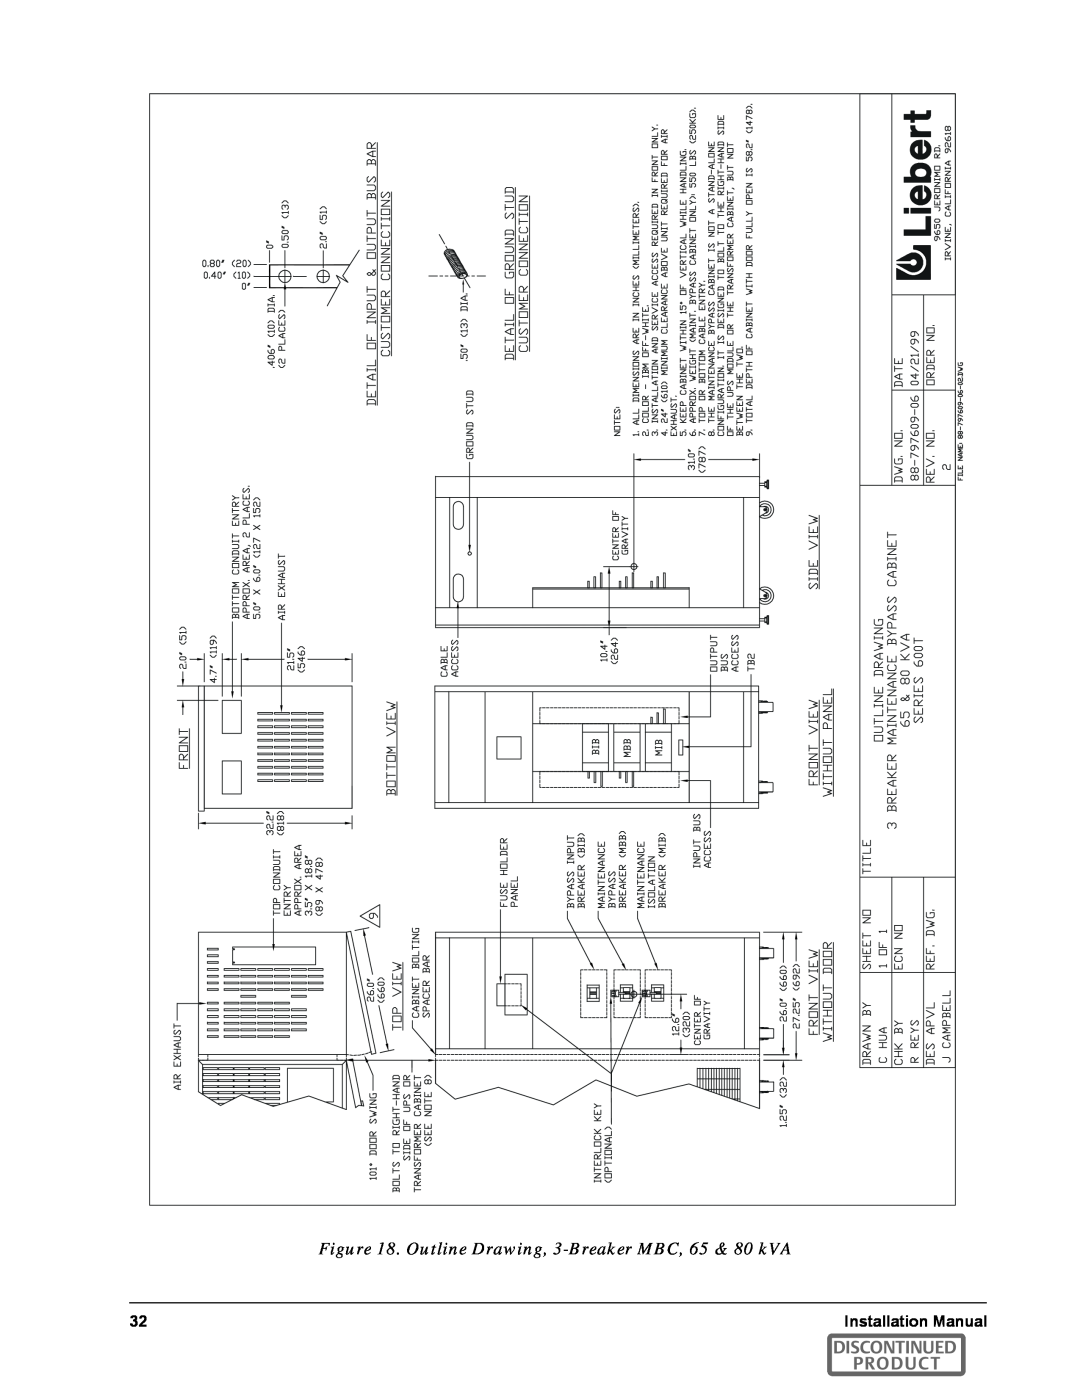 Emerson SERIES 600T manual Outline Drawing, 3-Breaker MBC, 65 & 80 kVA, Discontinued Product 